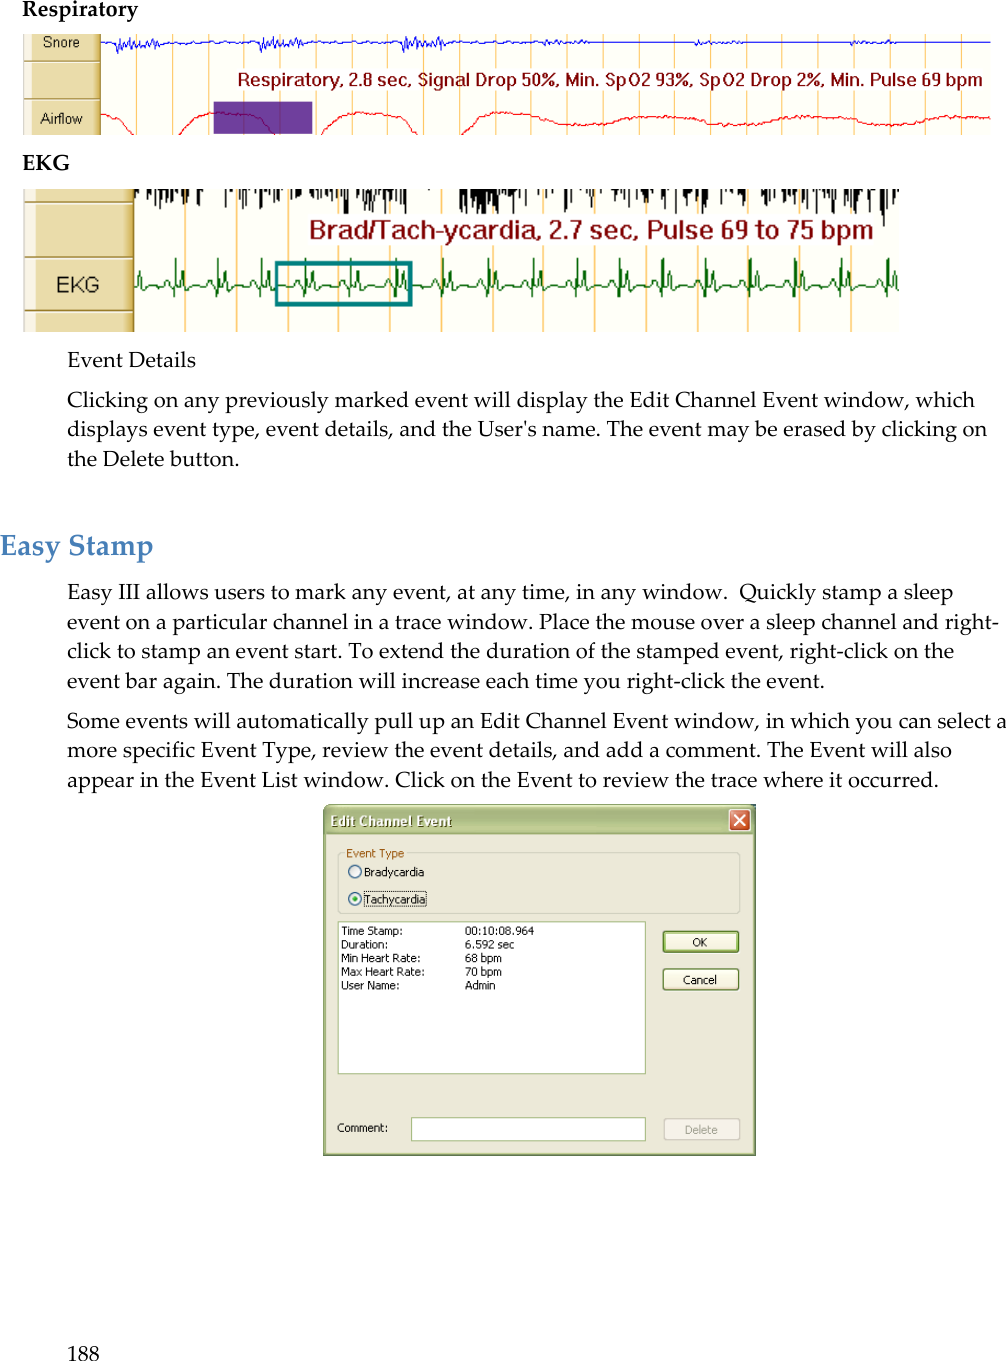 188  Respiratory  EKG  Event Details Clicking on any previously marked event will display the Edit Channel Event window, which displays event type, event details, and the User&apos;s name. The event may be erased by clicking on the Delete button.  Easy Stamp Easy III allows users to mark any event, at any time, in any window.  Quickly stamp a sleep event on a particular channel in a trace window. Place the mouse over a sleep channel and right-click to stamp an event start. To extend the duration of the stamped event, right-click on the event bar again. The duration will increase each time you right-click the event.  Some events will automatically pull up an Edit Channel Event window, in which you can select a more specific Event Type, review the event details, and add a comment. The Event will also appear in the Event List window. Click on the Event to review the trace where it occurred.  